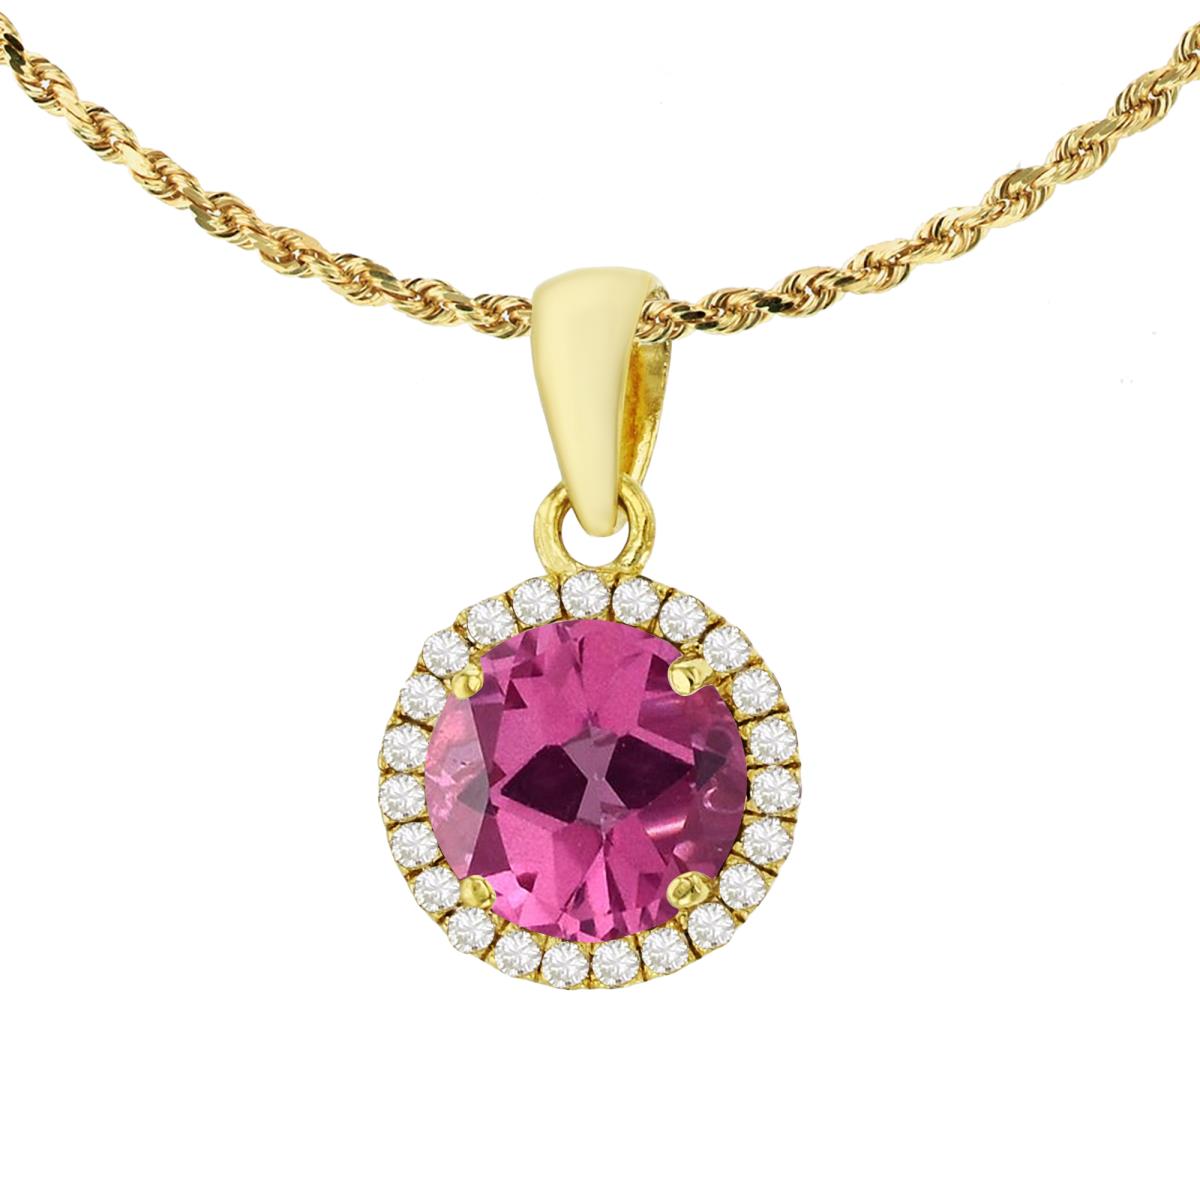 10K Yellow Gold 7mm Round Pure Pink & 0.12 CTTW Diamond Halo 18" Rope Chain Necklace